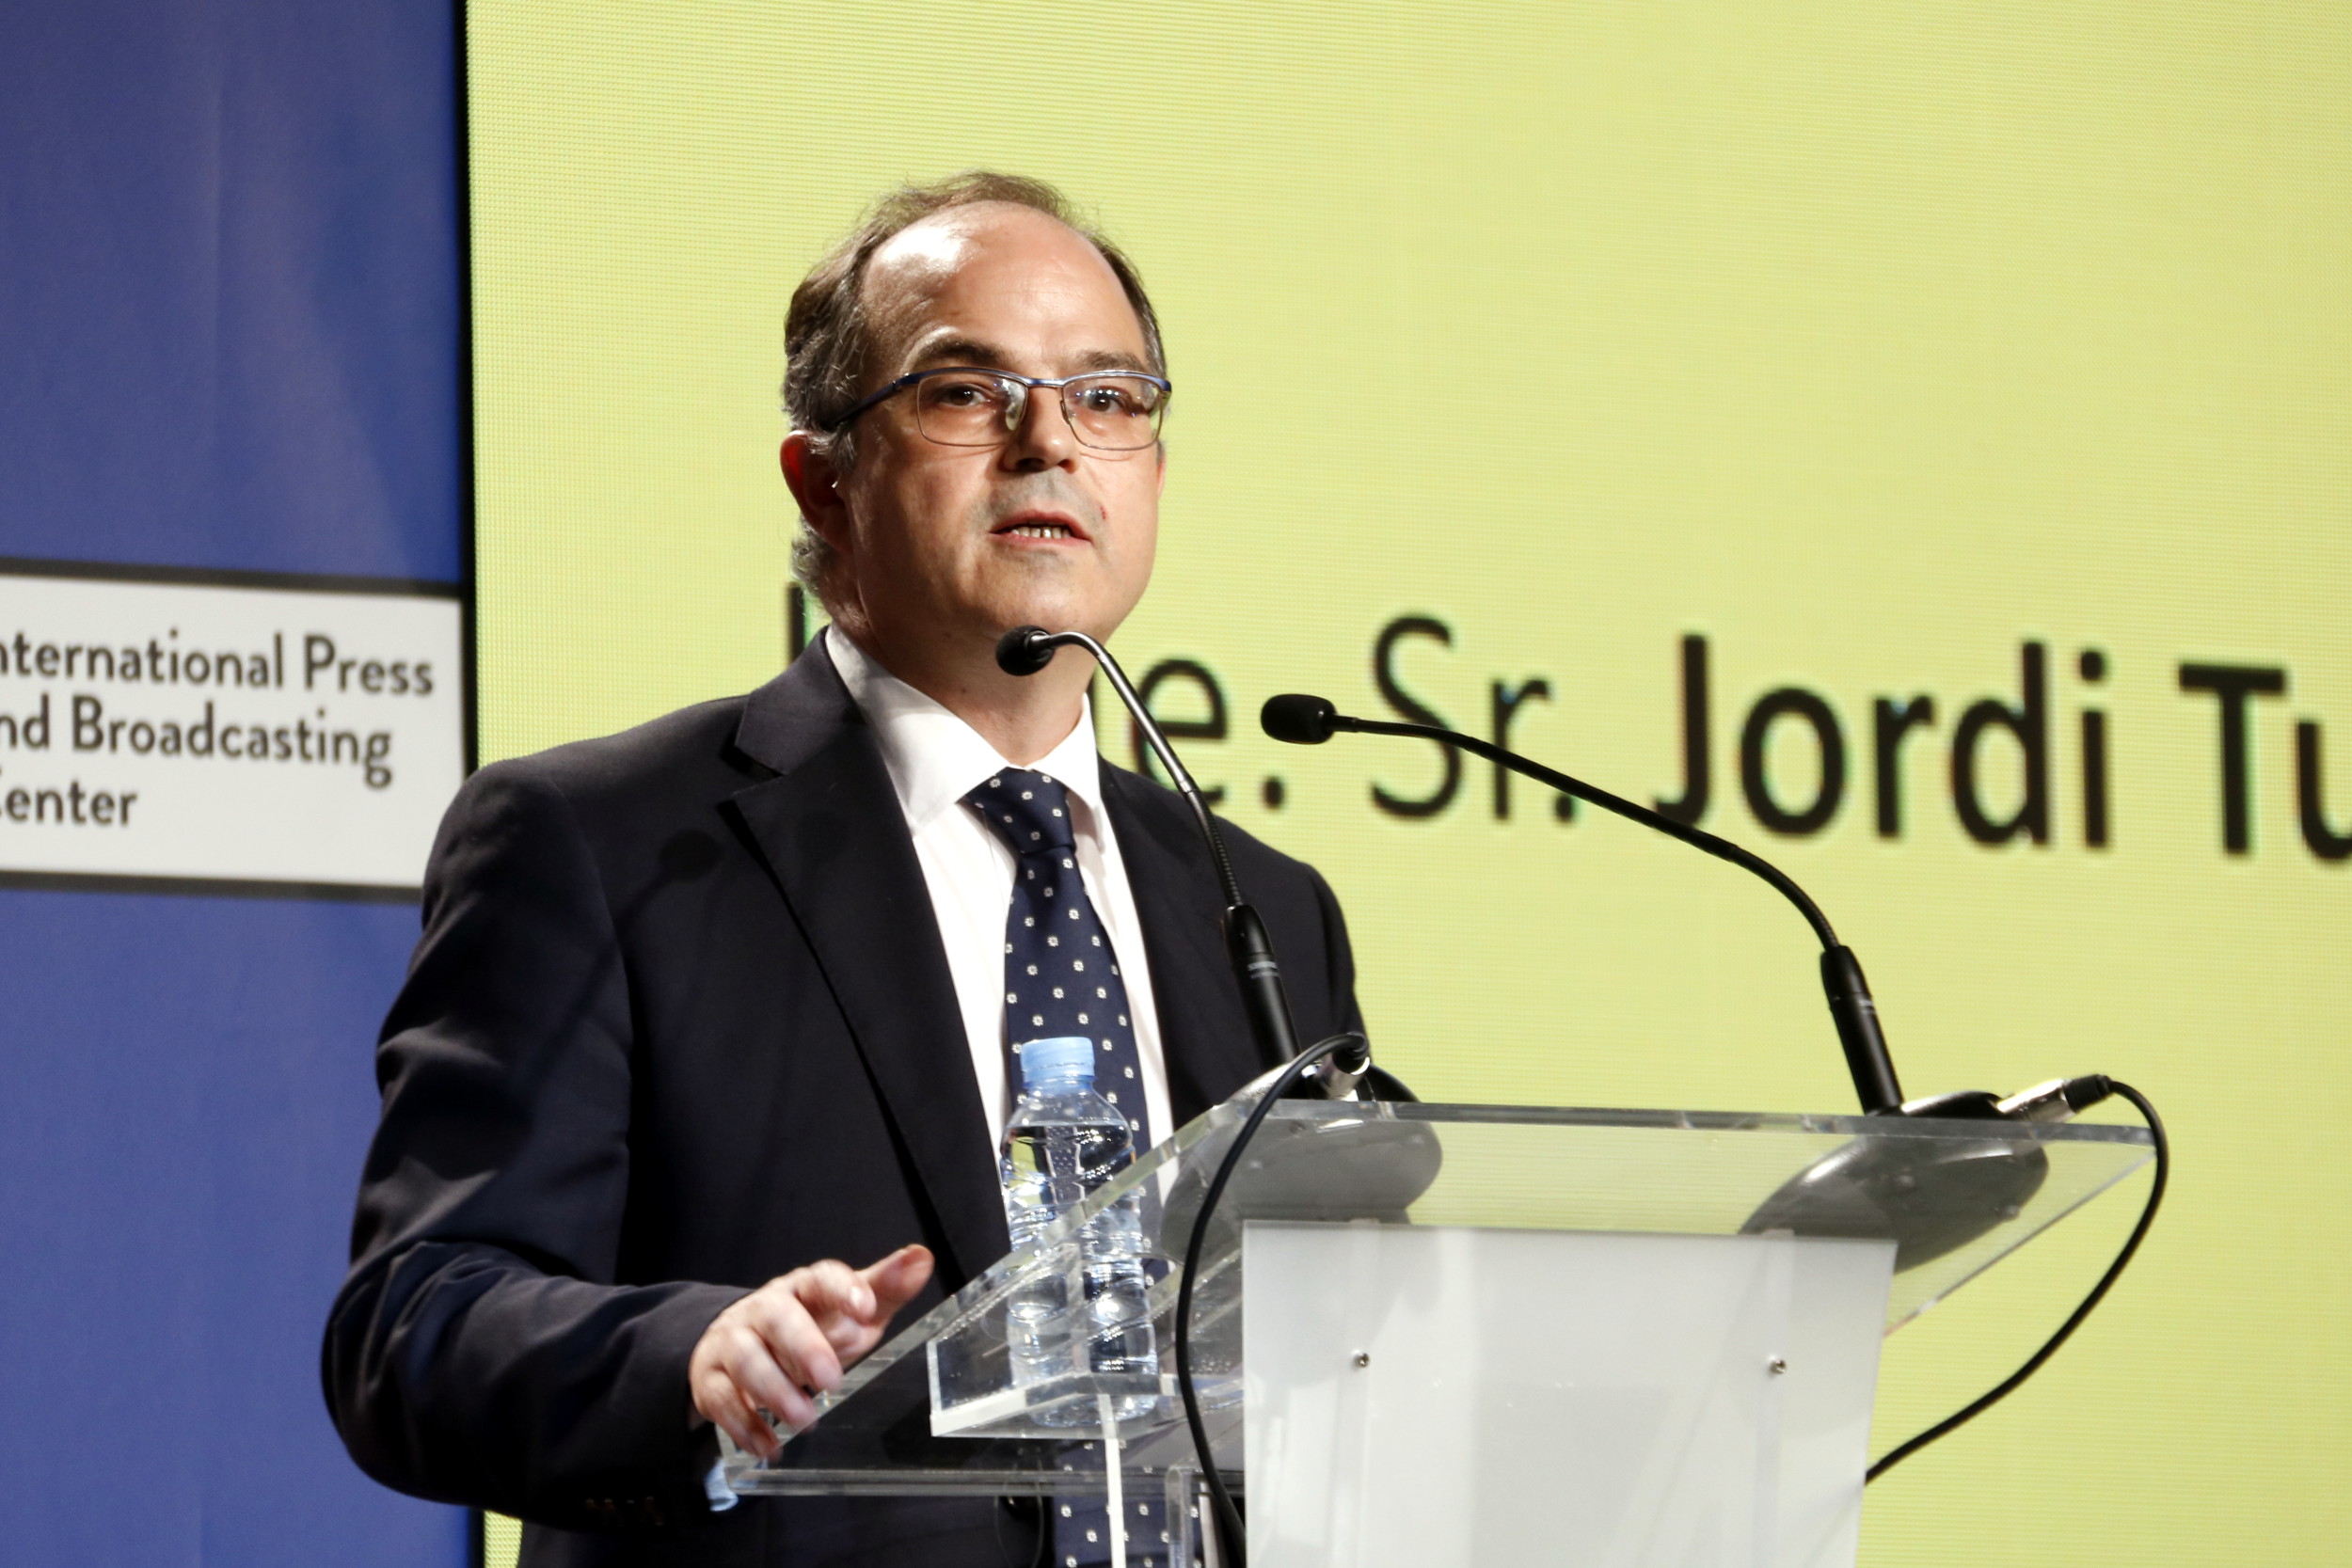 Catalan government spokesperson Jordi Turull speaks at a press conference on October 1 (by ACN)